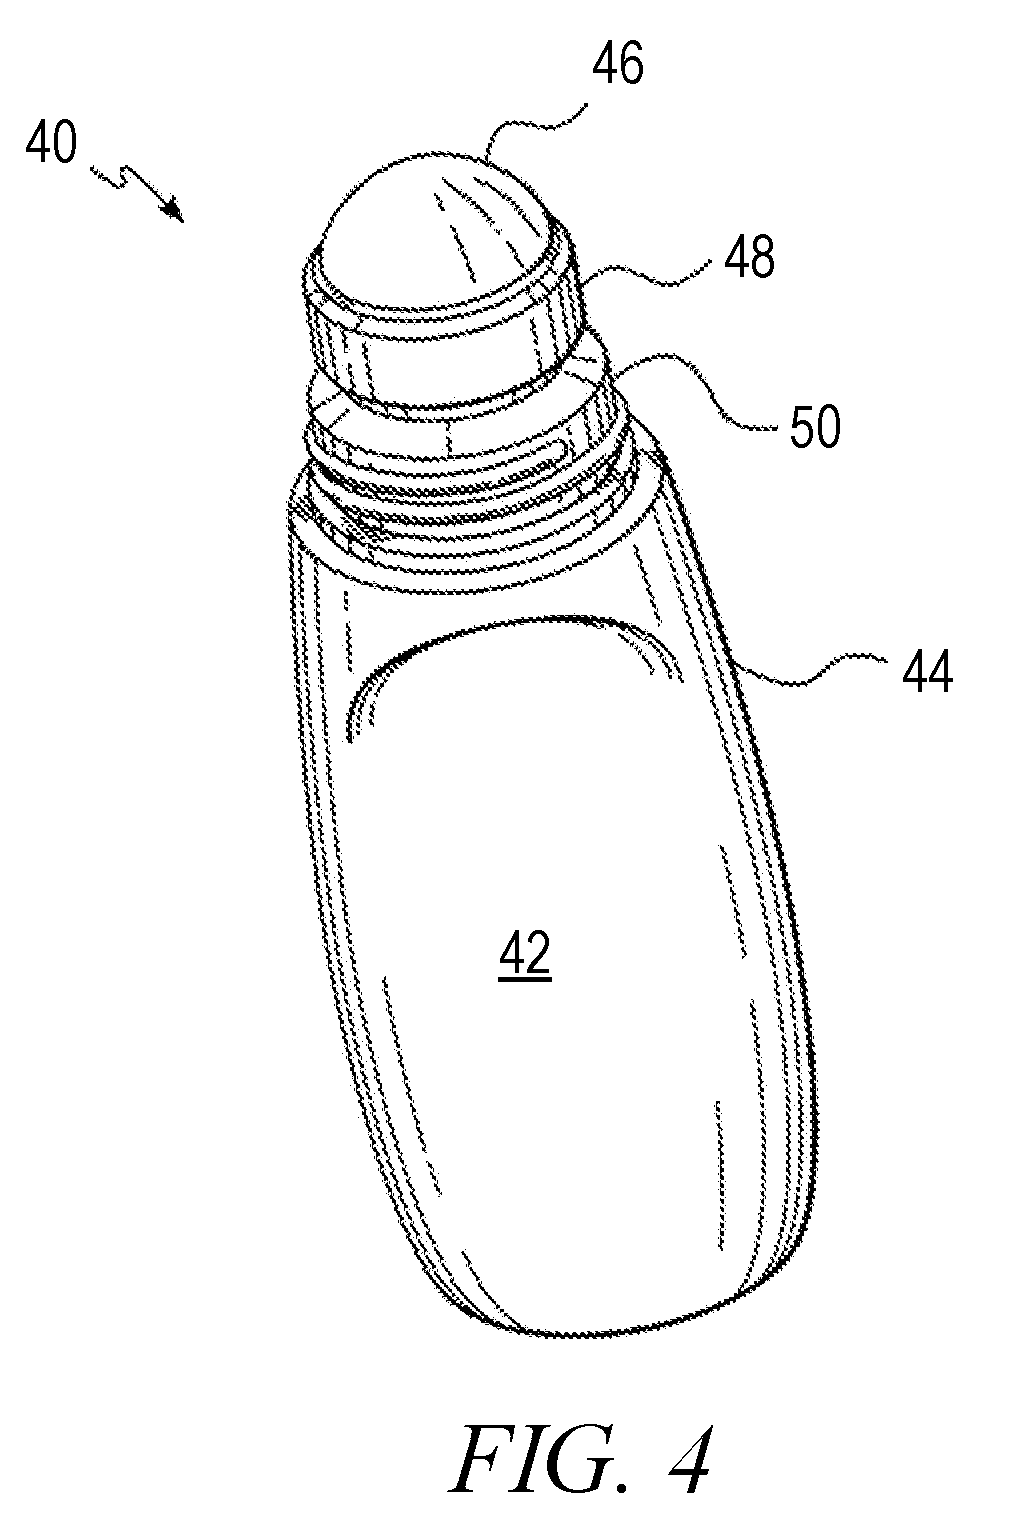 Photochromic indicator and a method of documenting decontamination of an object using a photochromic indicator